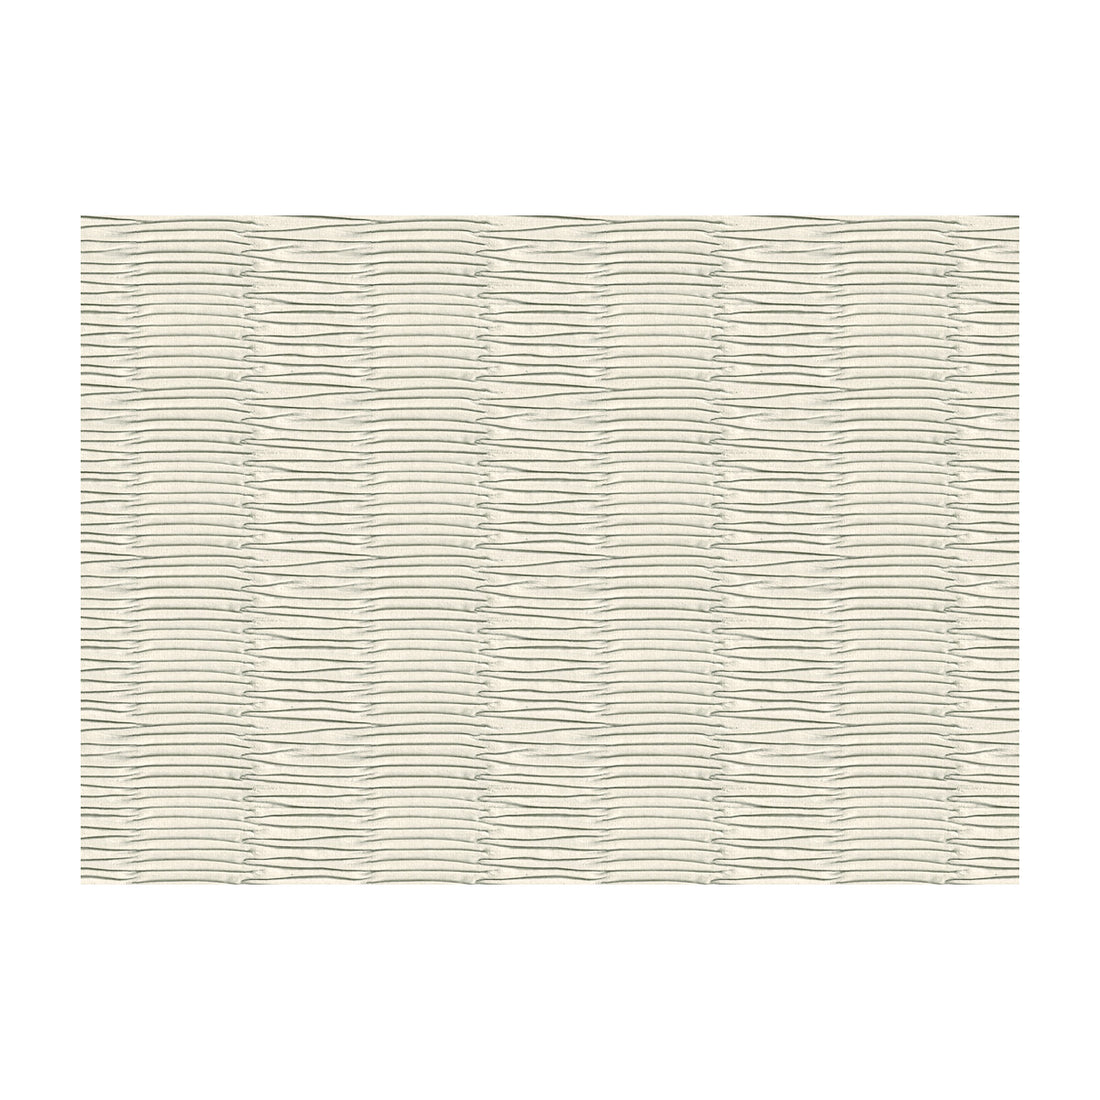 Metallic Pleat fabric in platinum color - pattern 32119.1.0 - by Kravet Couture in the Modern Luxe collection